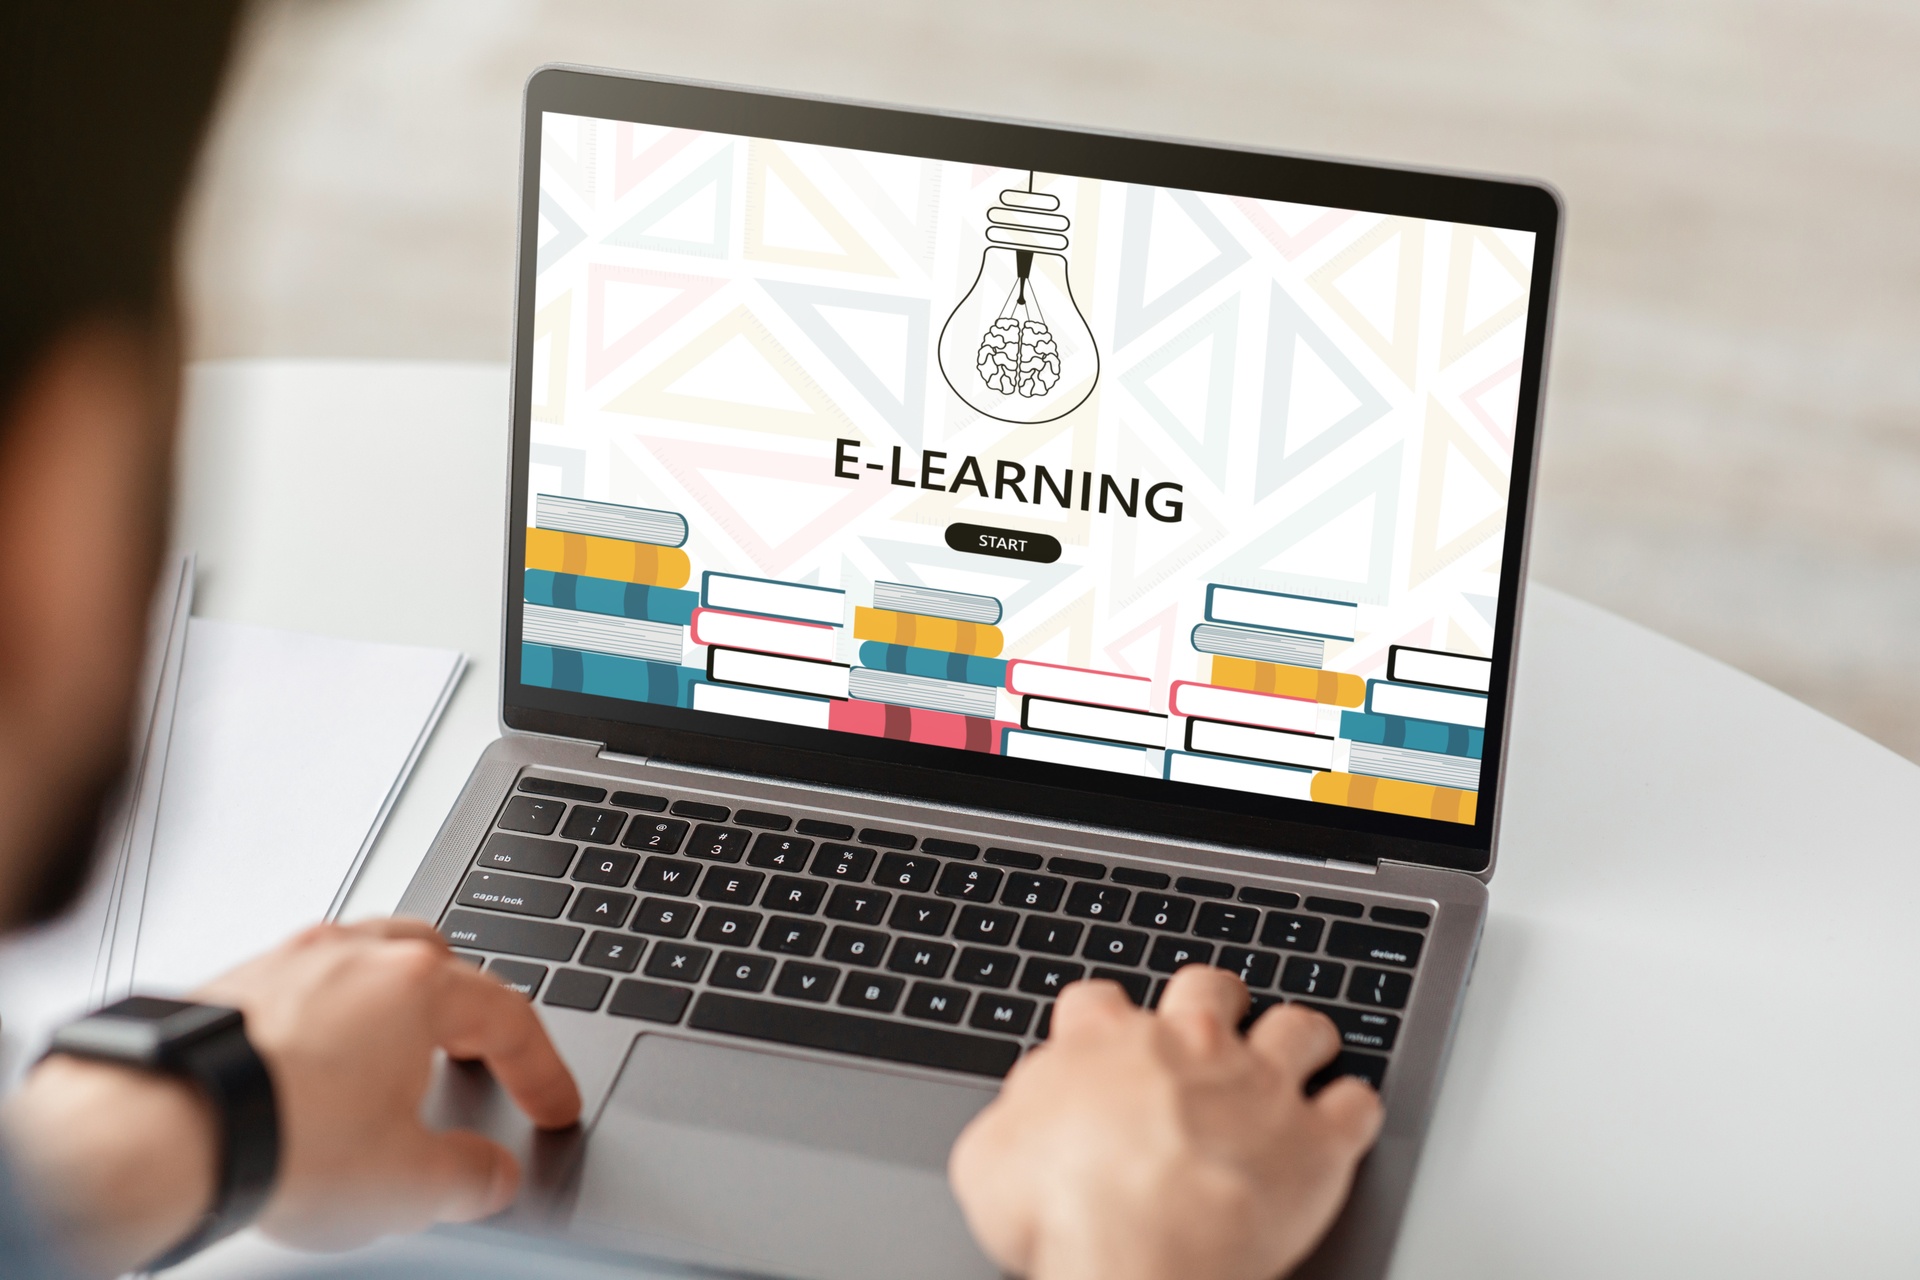 eLearning is one of the strategies for immersive employee onboarding.